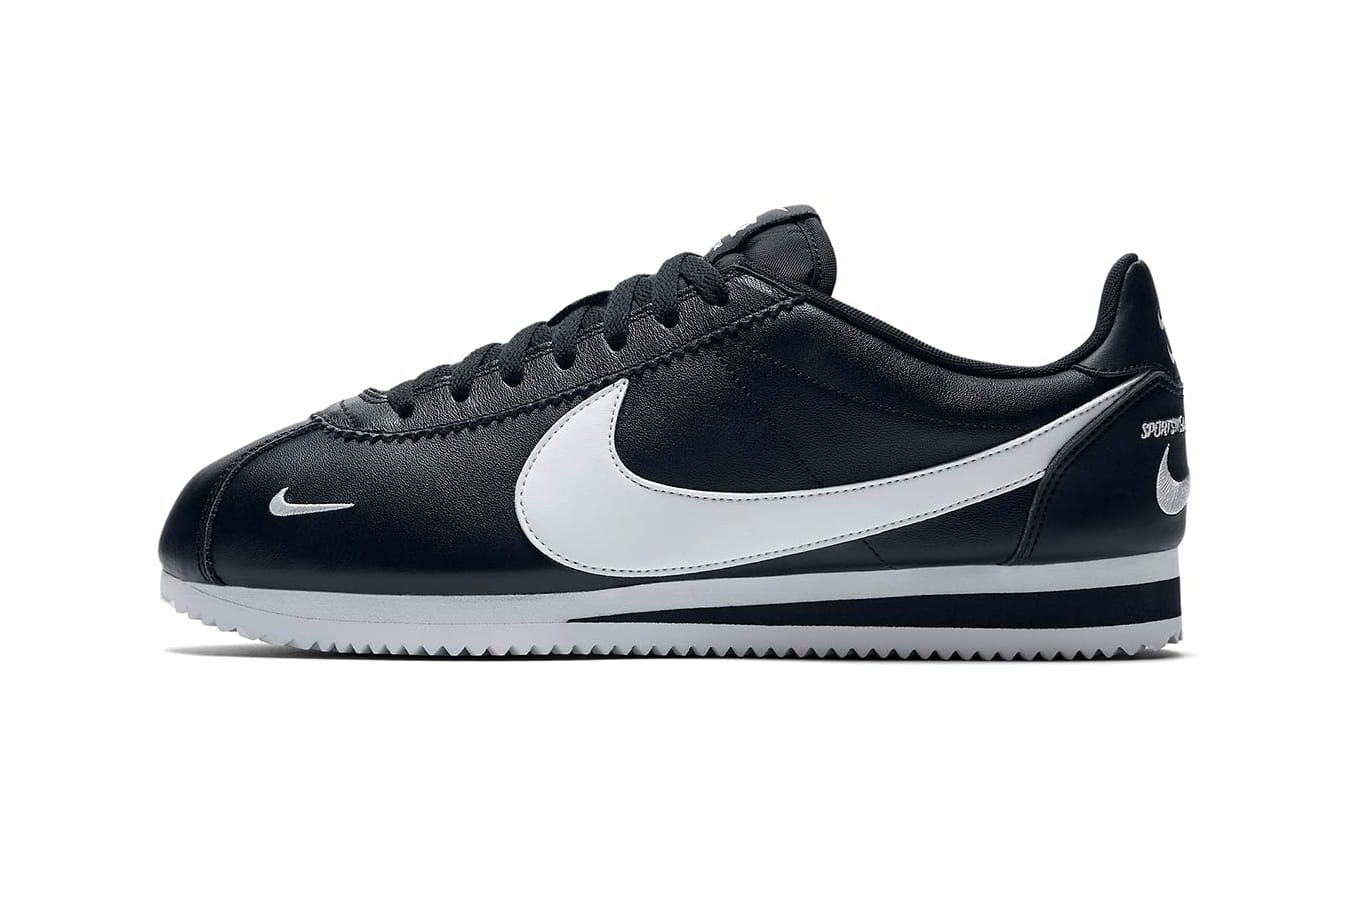 Nike Unveils New Cortez With a Swarm of 